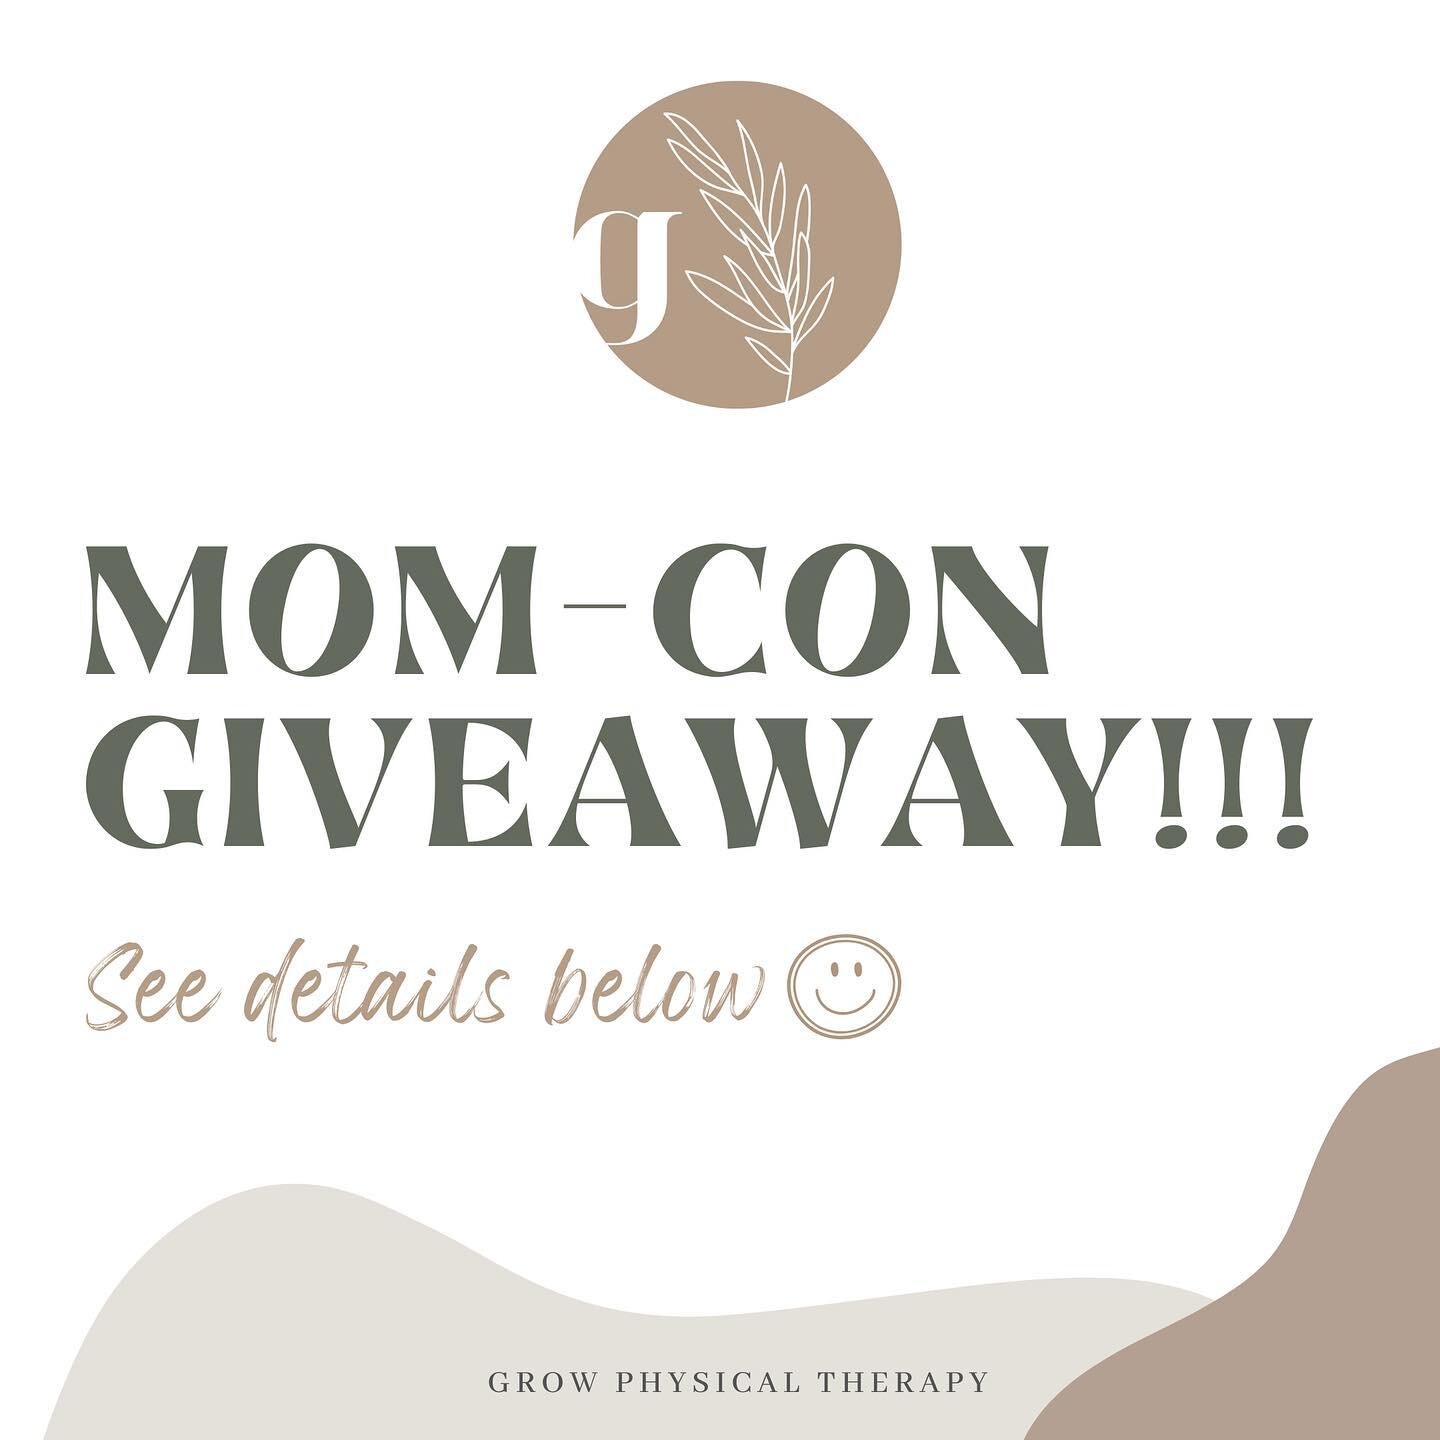 I am excited to announce that I am giving away one ticket to the ICT Mom-Con on September 10th!

To enter:
+ Make sure you are following me and like this post
+ Tag a friend (each friend = one entry)
+ Earn an extra entry sharing this post to your st